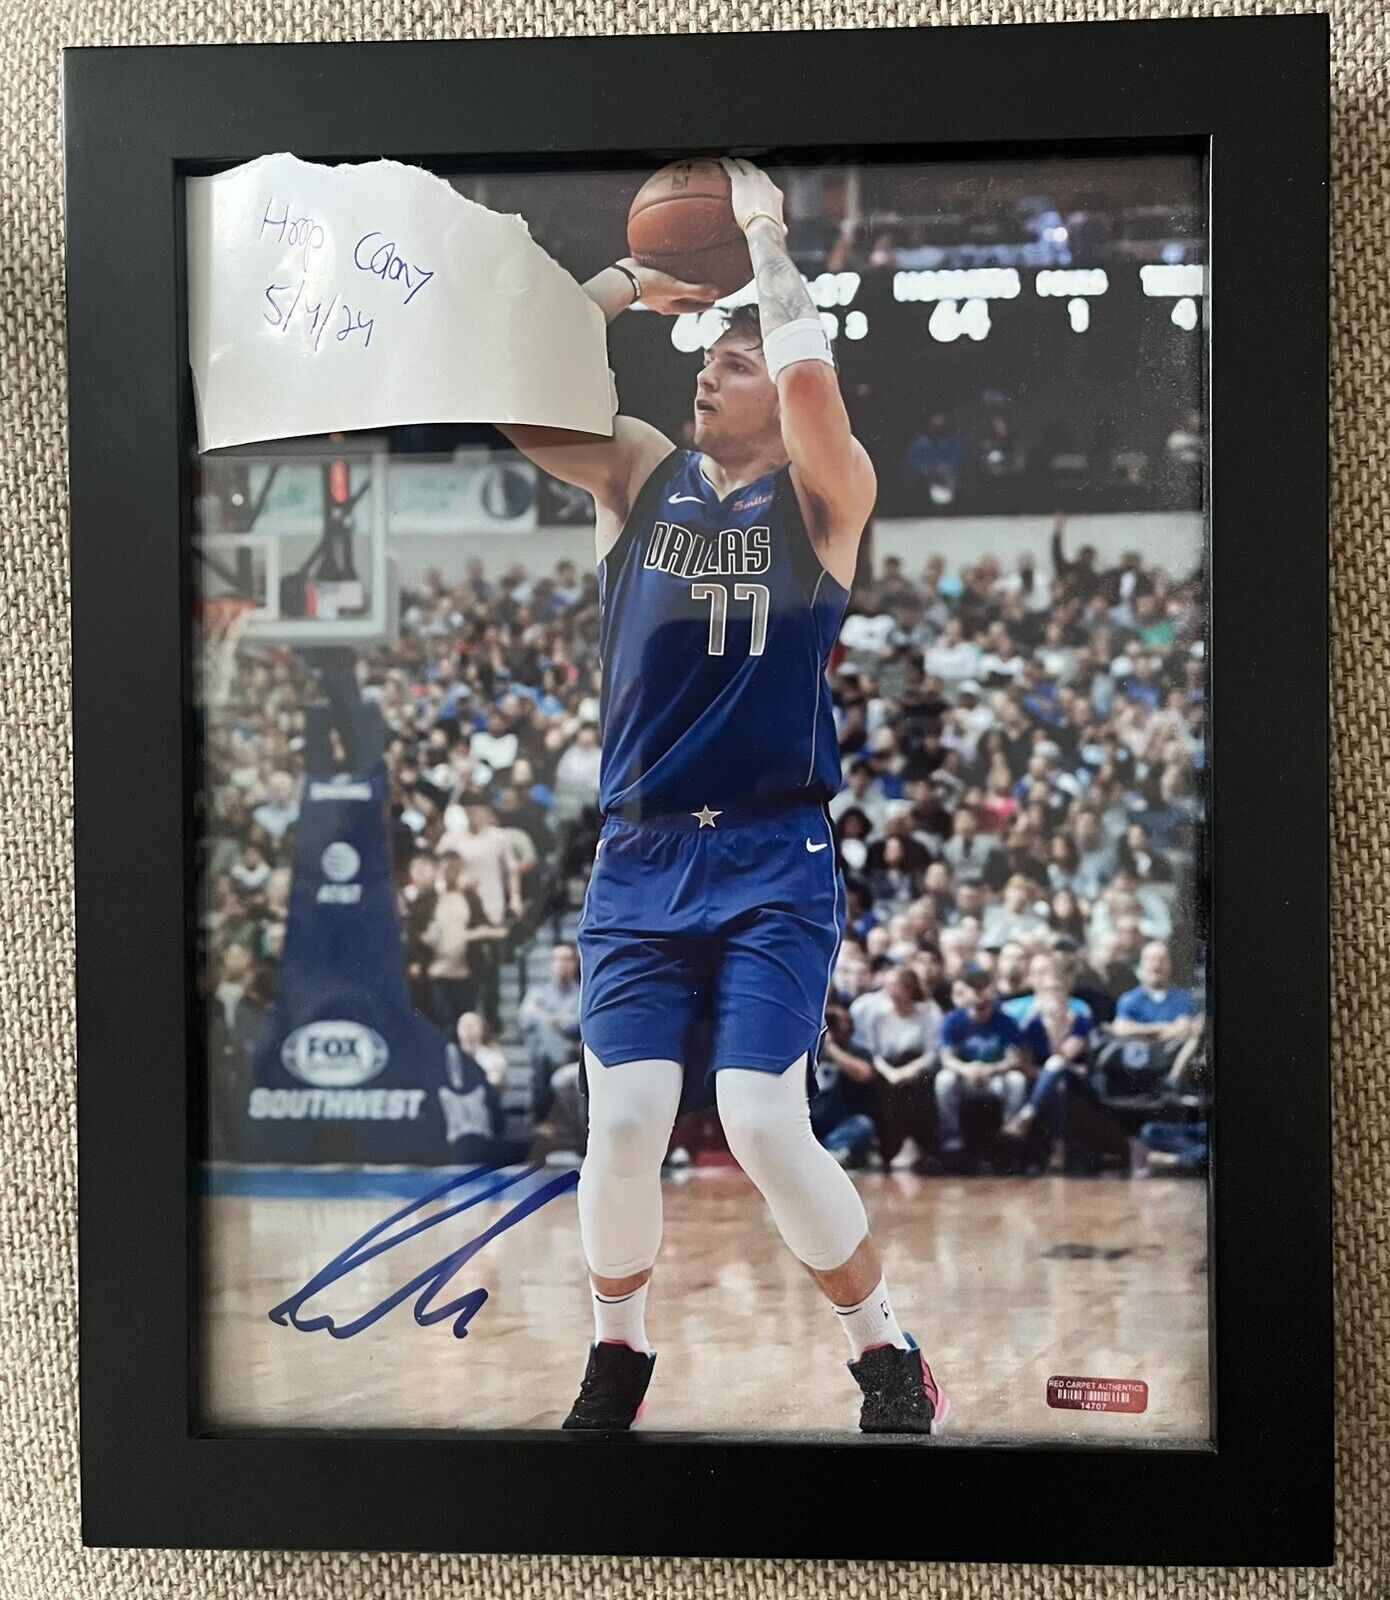 Luka Doncic And Vince Carter 8x10 Signed Photos Both With COA.